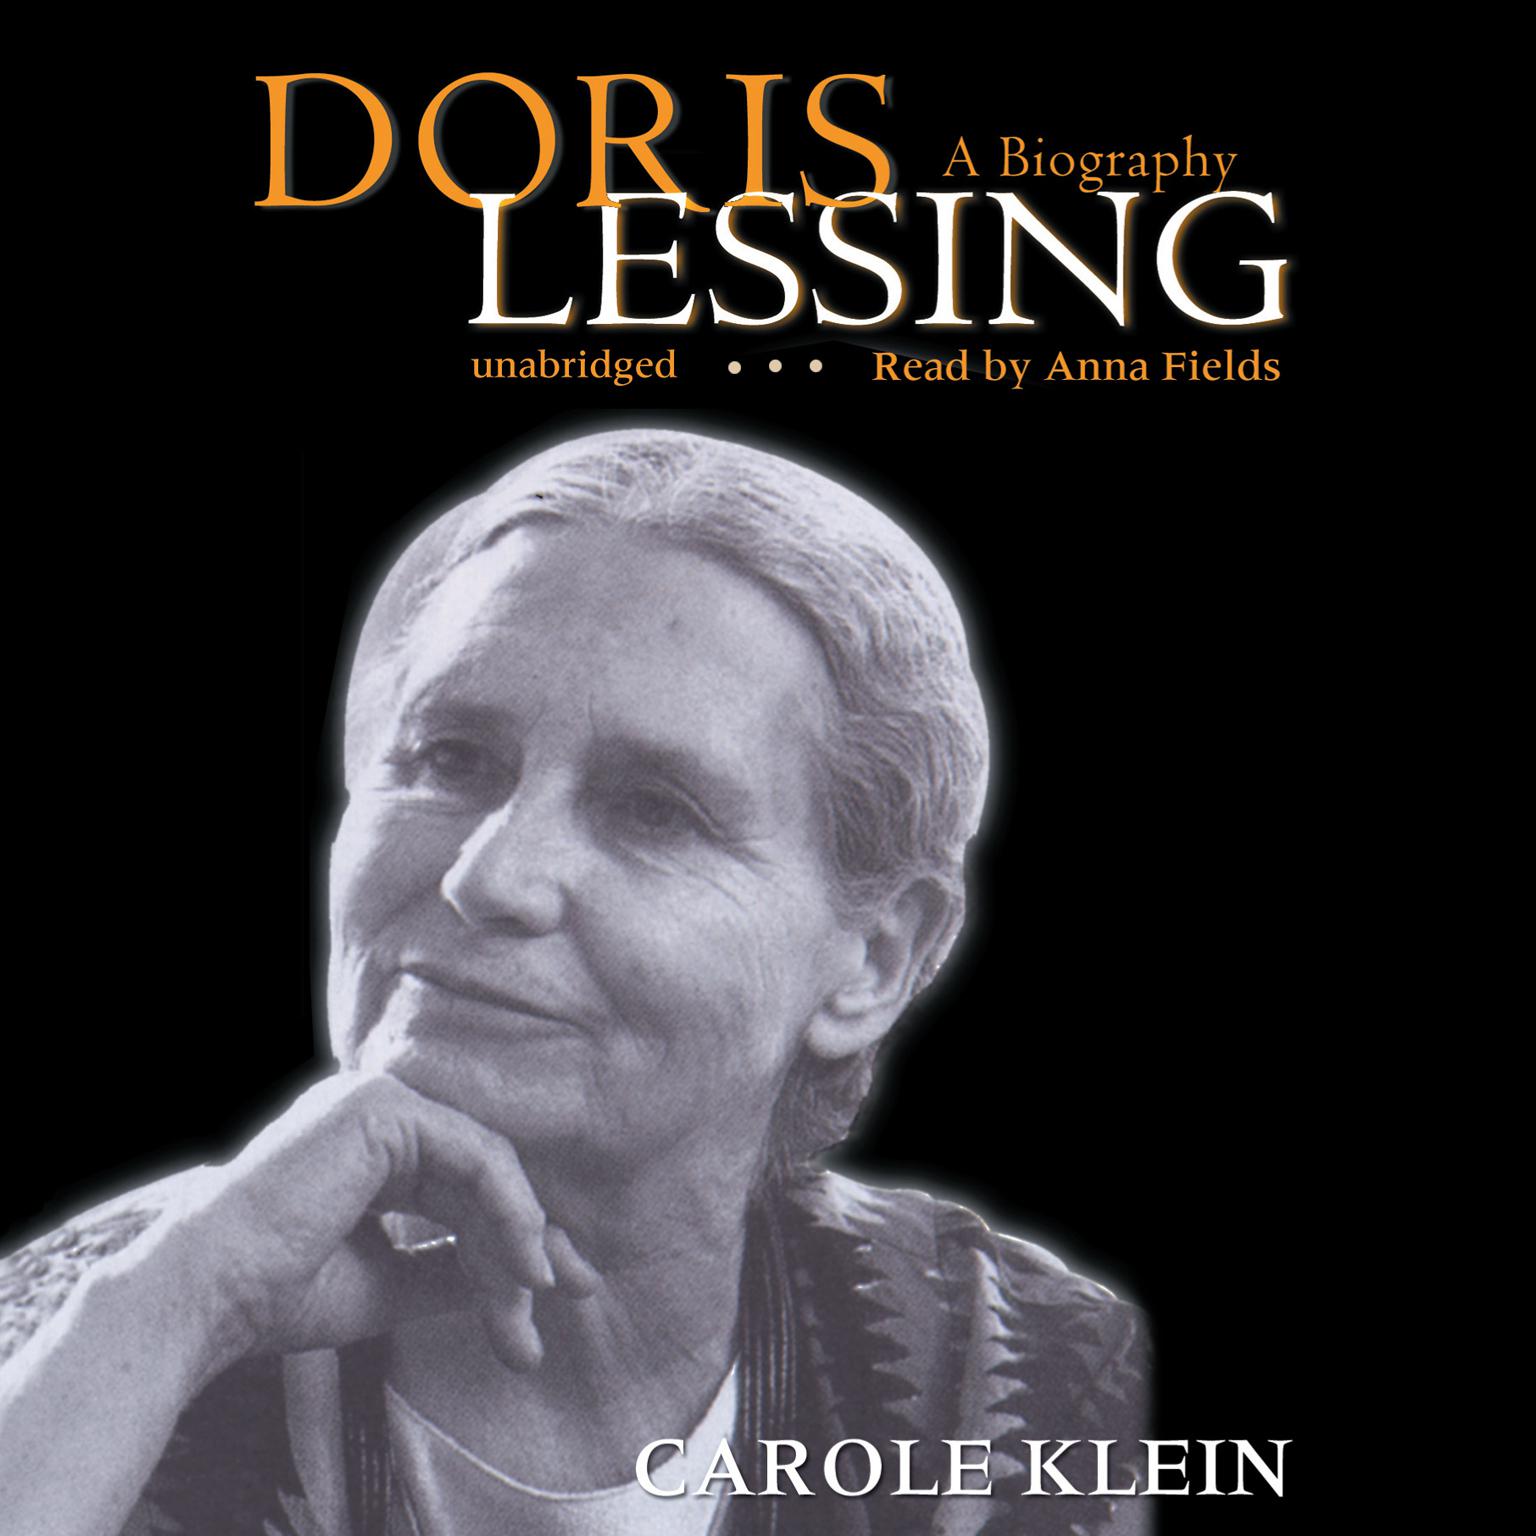 Doris Lessing: A Biography Audiobook, by Carole Klein